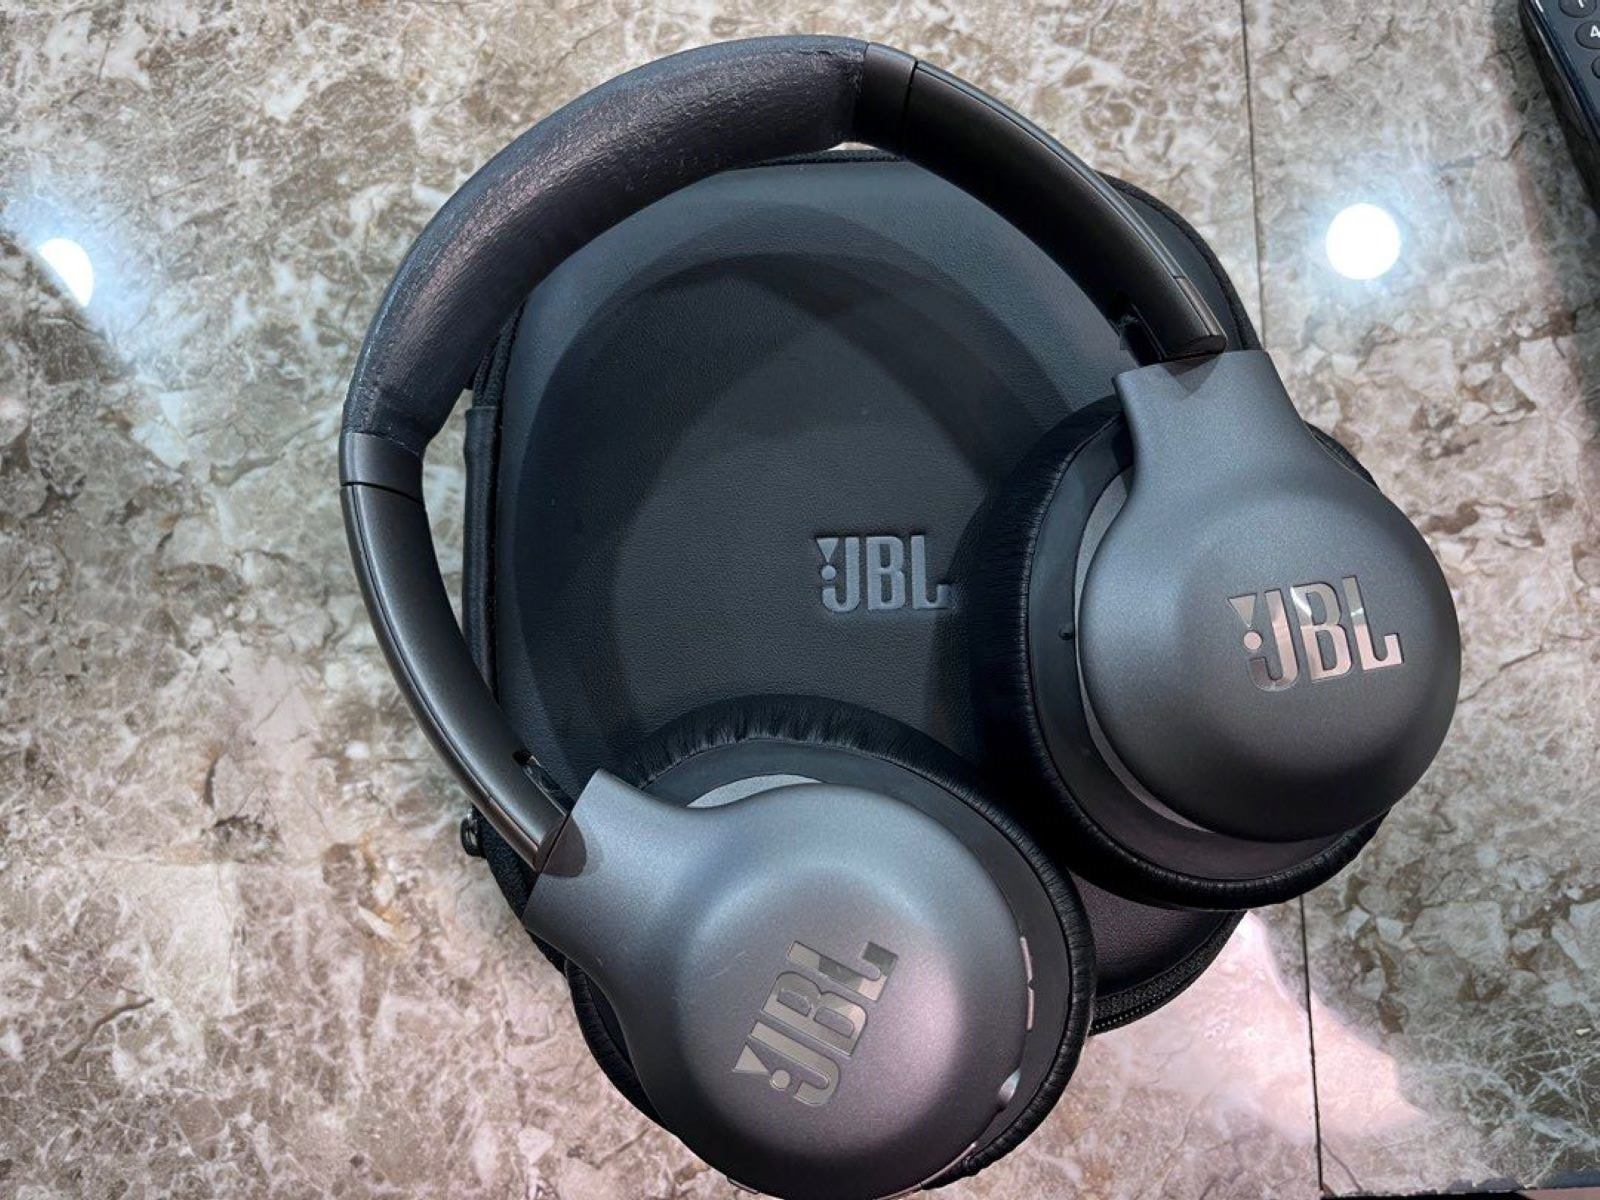 JBL Headset Pairing: A Quick Guide